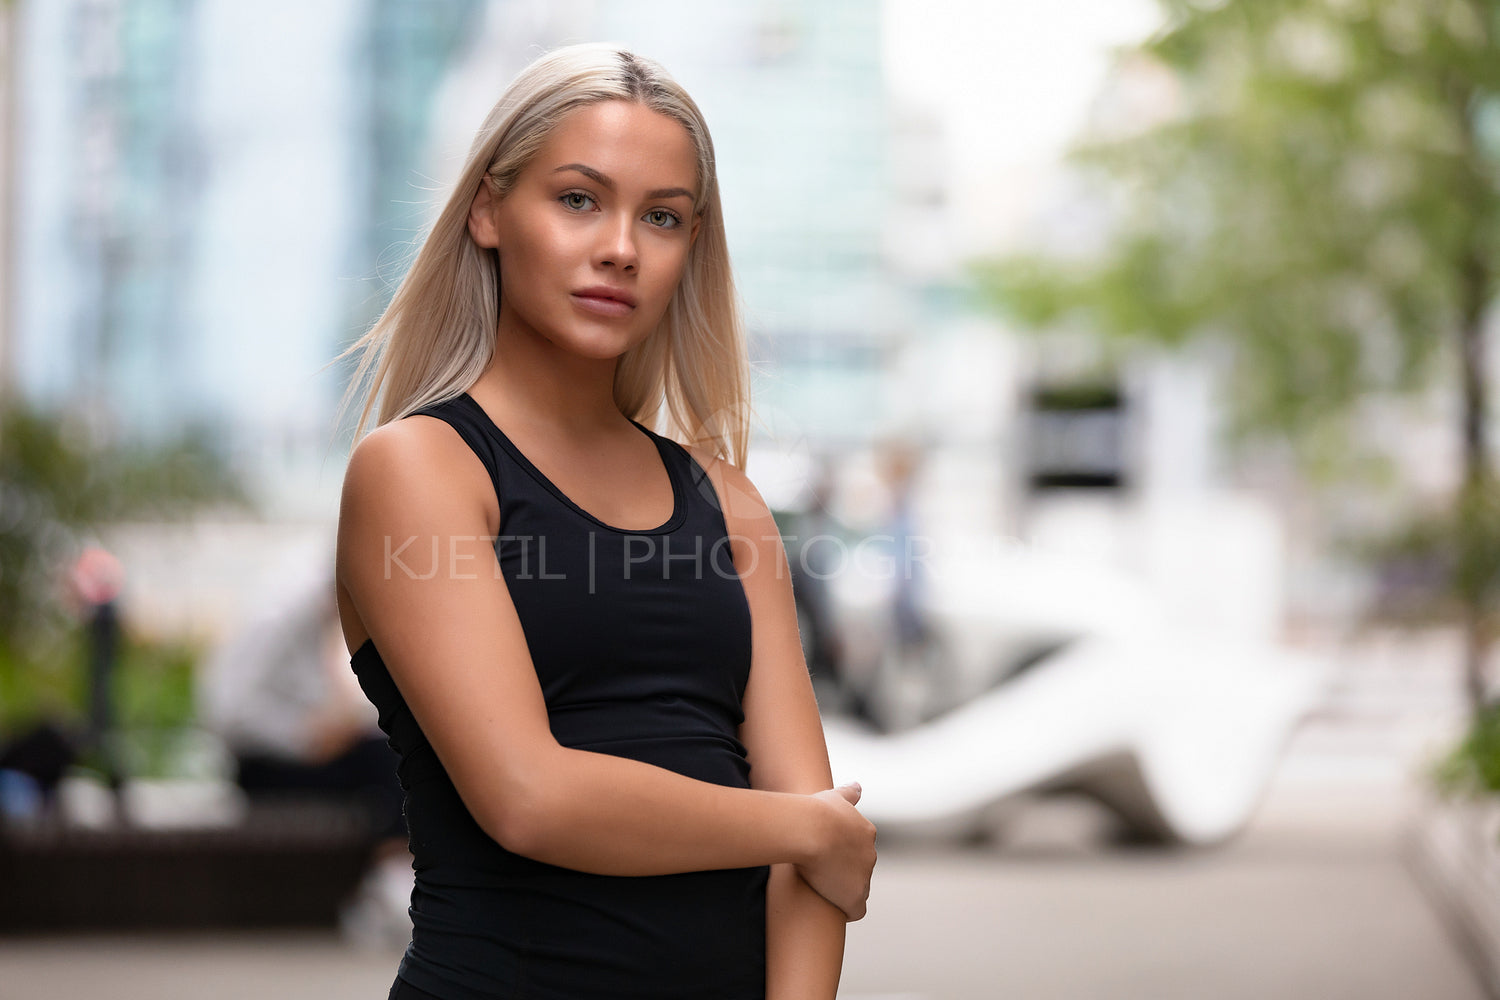 Portrait of a beautiful young woman fitness model looking at camera